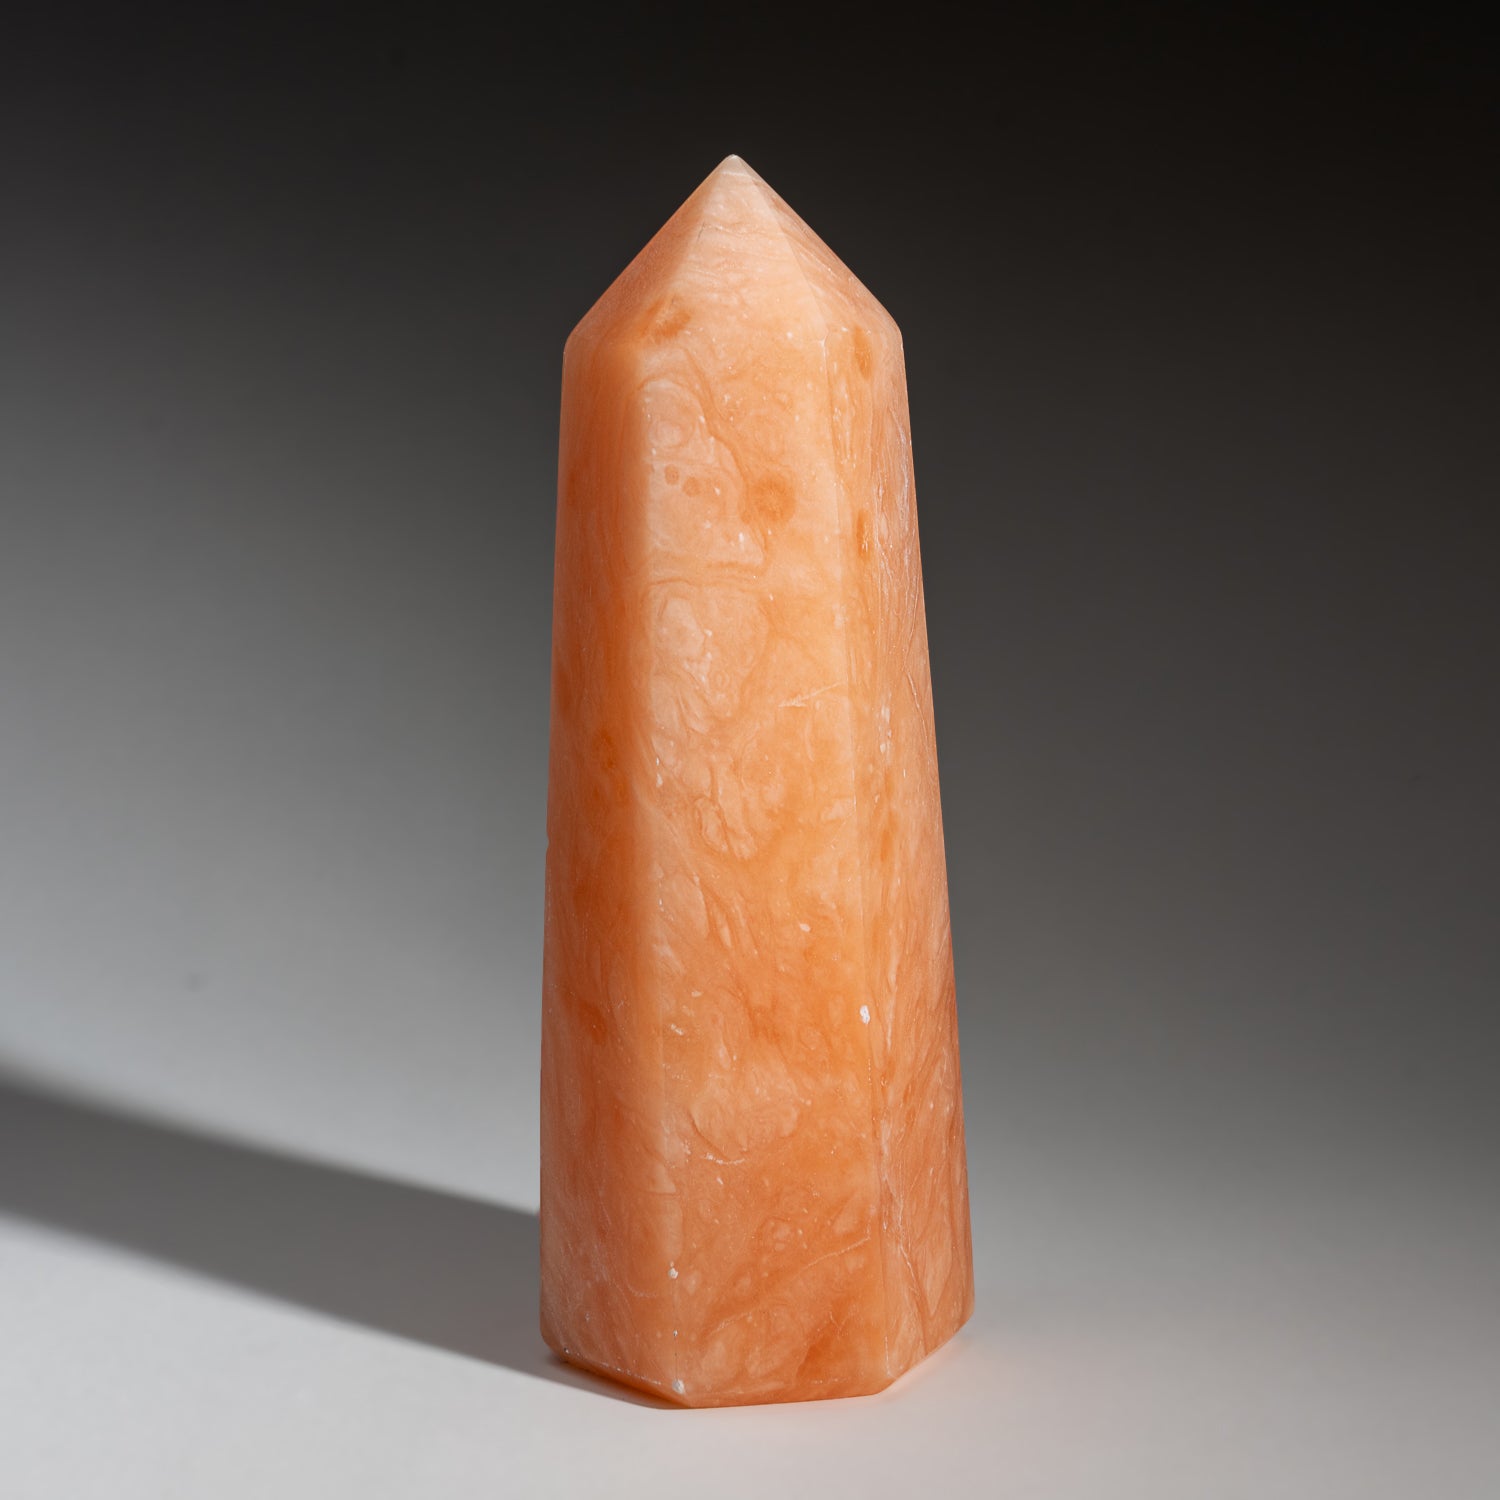 Genuine Polished Orange Selenite Point from Morocco (2.4 lbs)